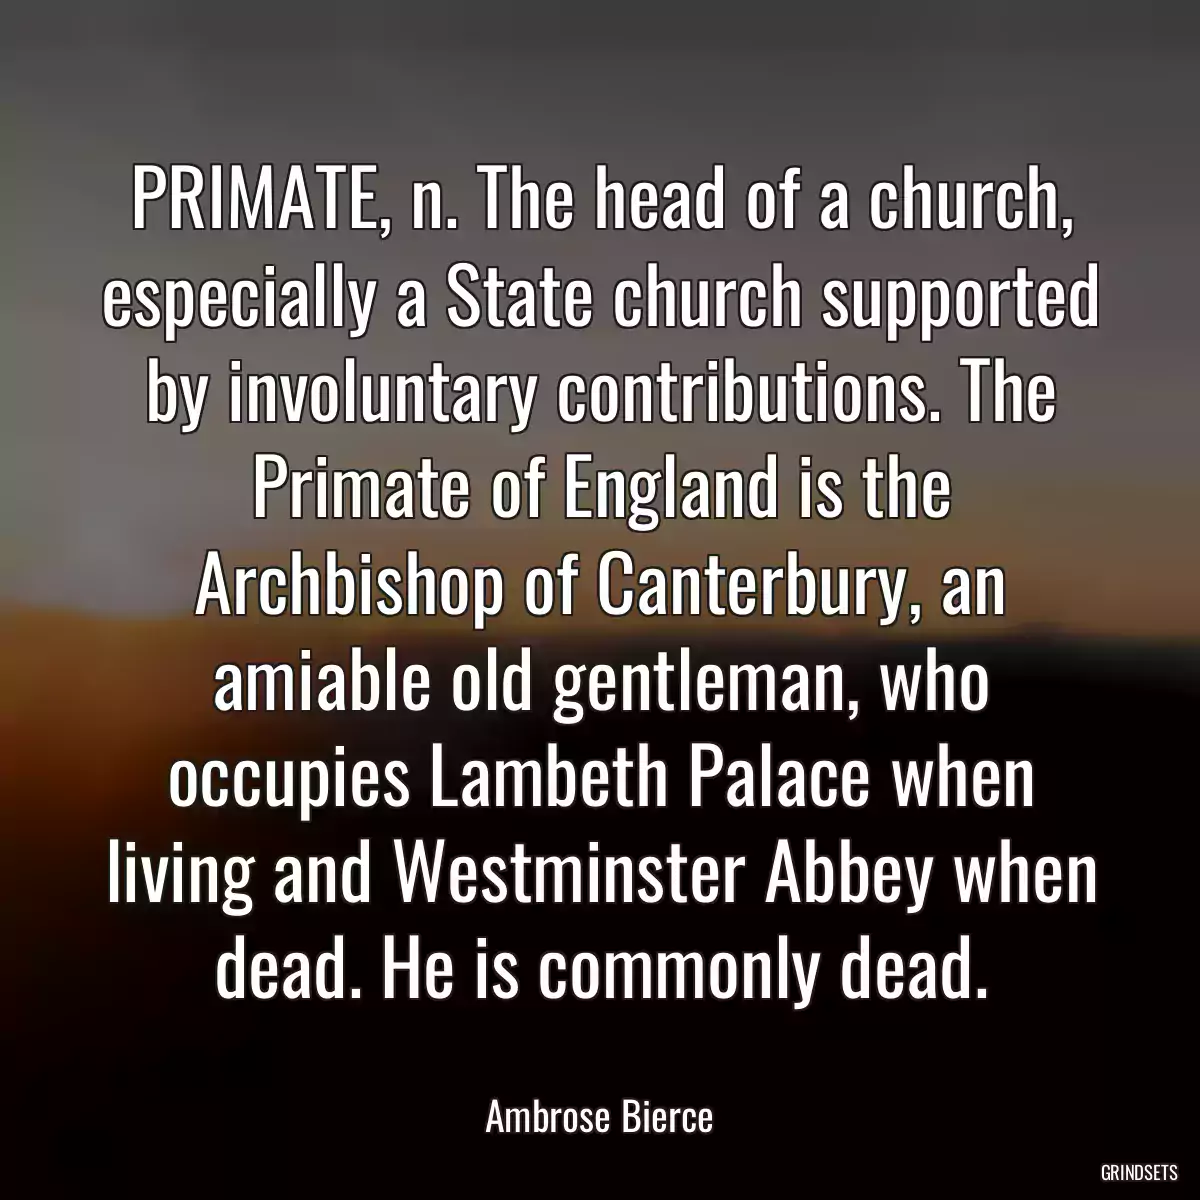 PRIMATE, n. The head of a church, especially a State church supported by involuntary contributions. The Primate of England is the Archbishop of Canterbury, an amiable old gentleman, who occupies Lambeth Palace when living and Westminster Abbey when dead. He is commonly dead.